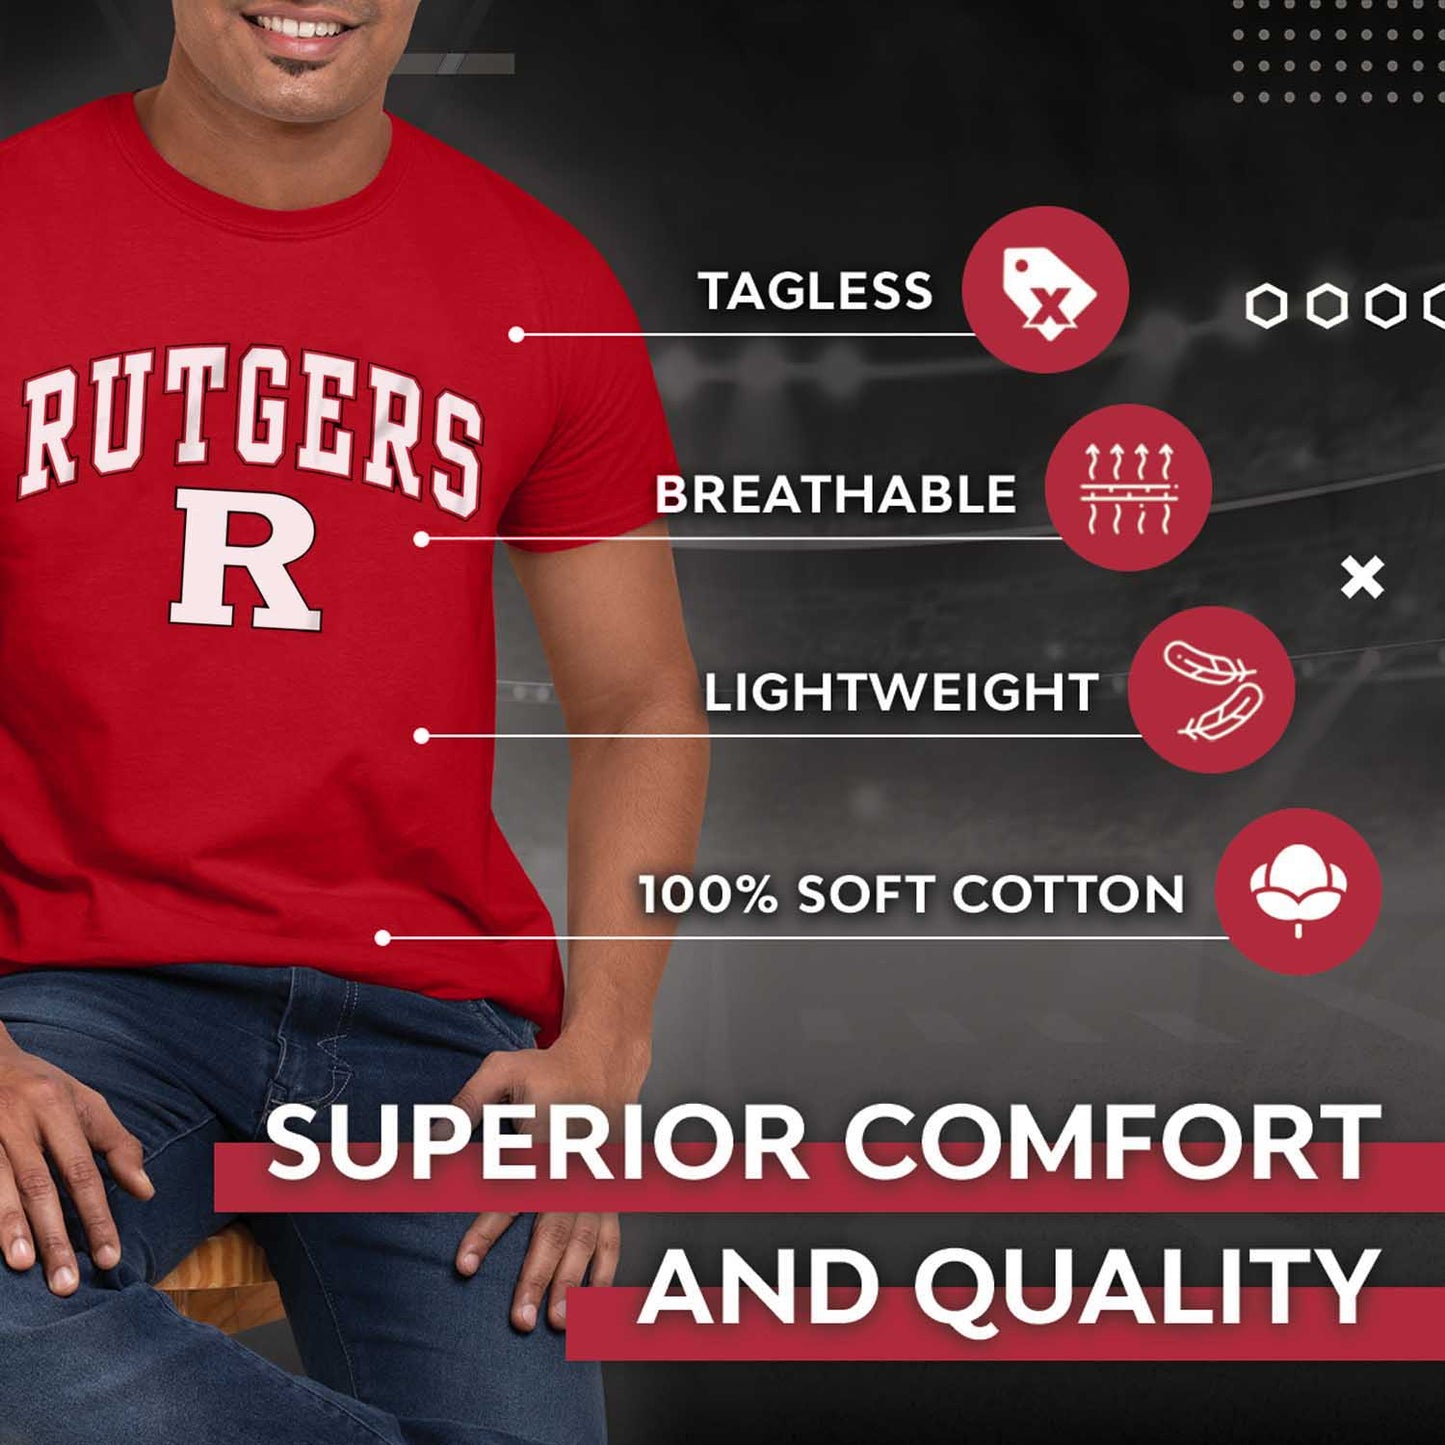 Rutgers Scarlet Knights NCAA Adult Gameday Cotton T-Shirt - Red